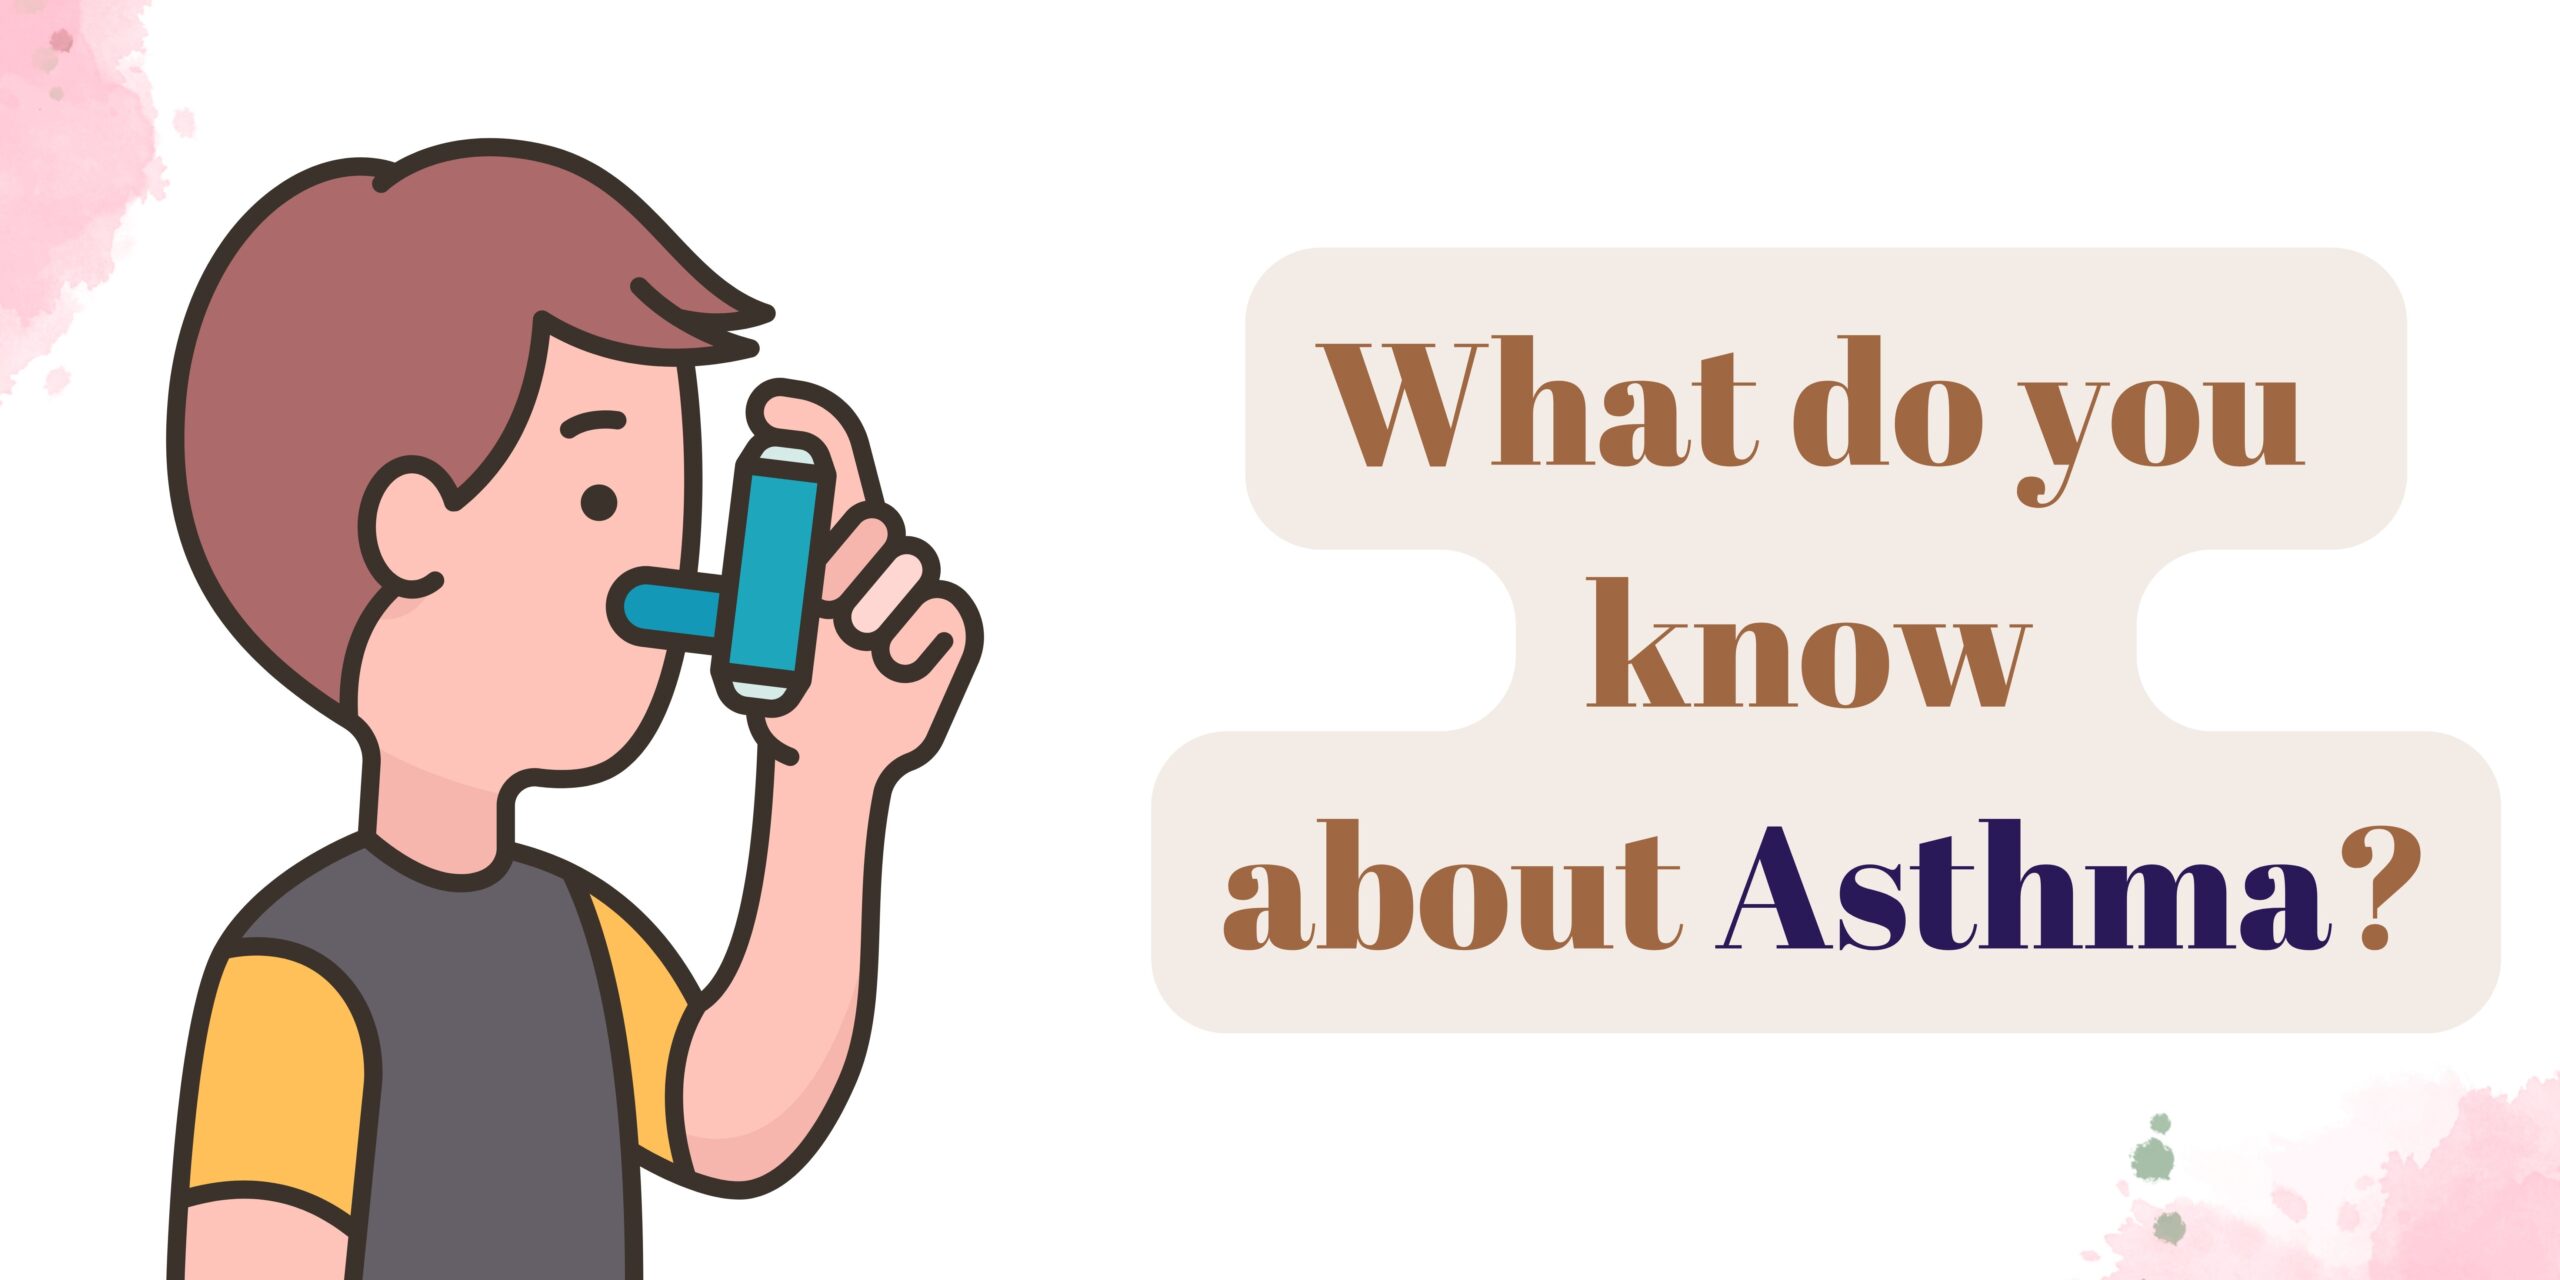 What do you know about Asthma?